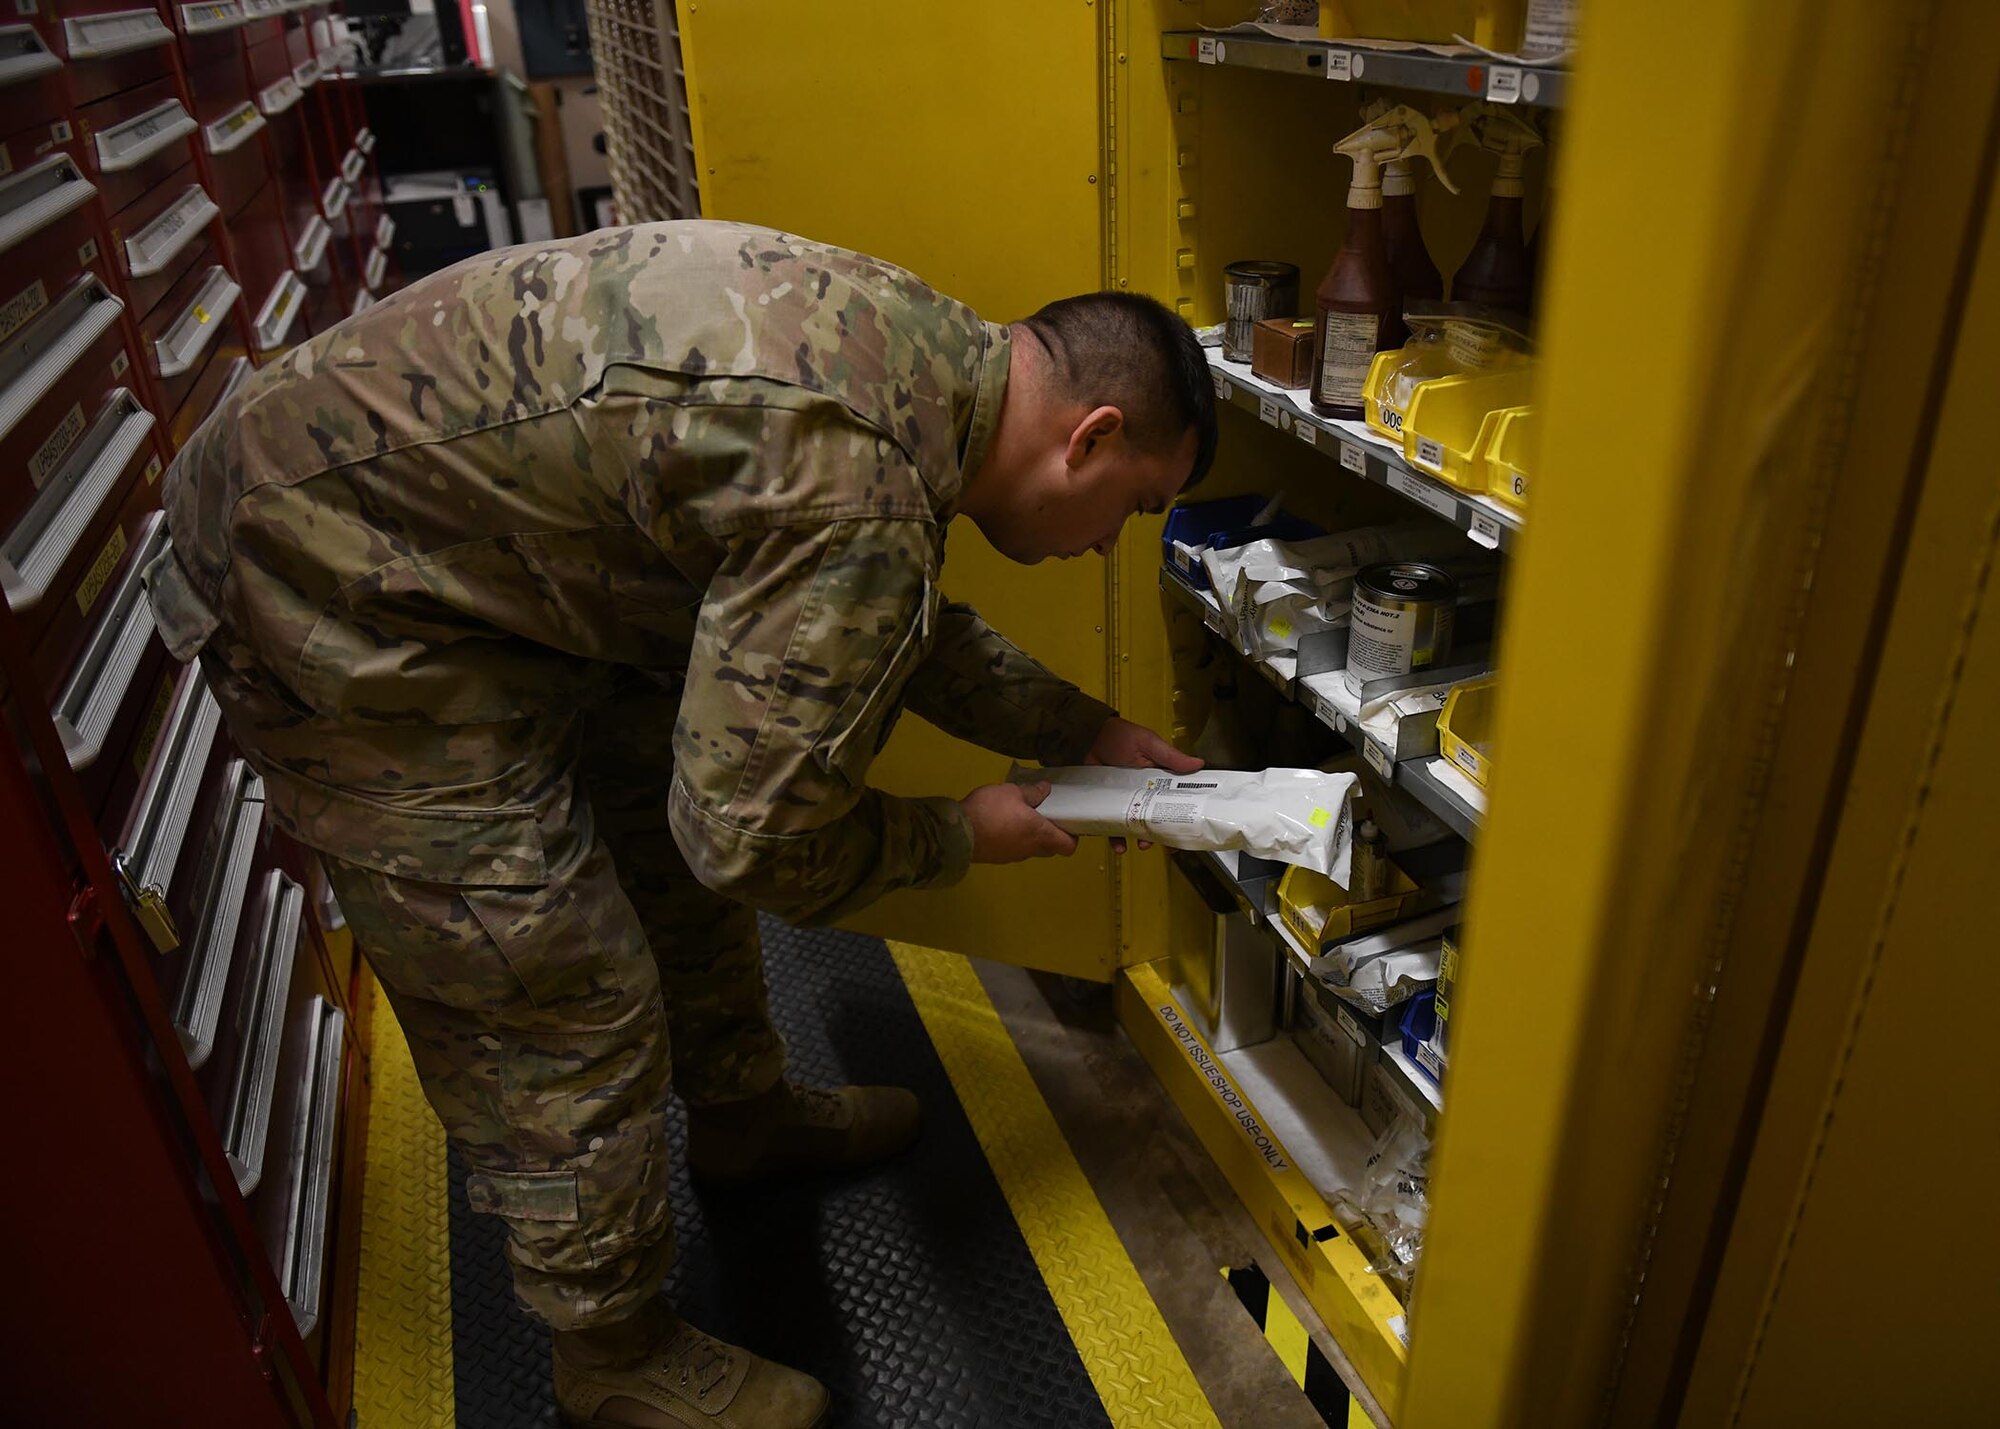 An Airman looks inside a yellow storage container.